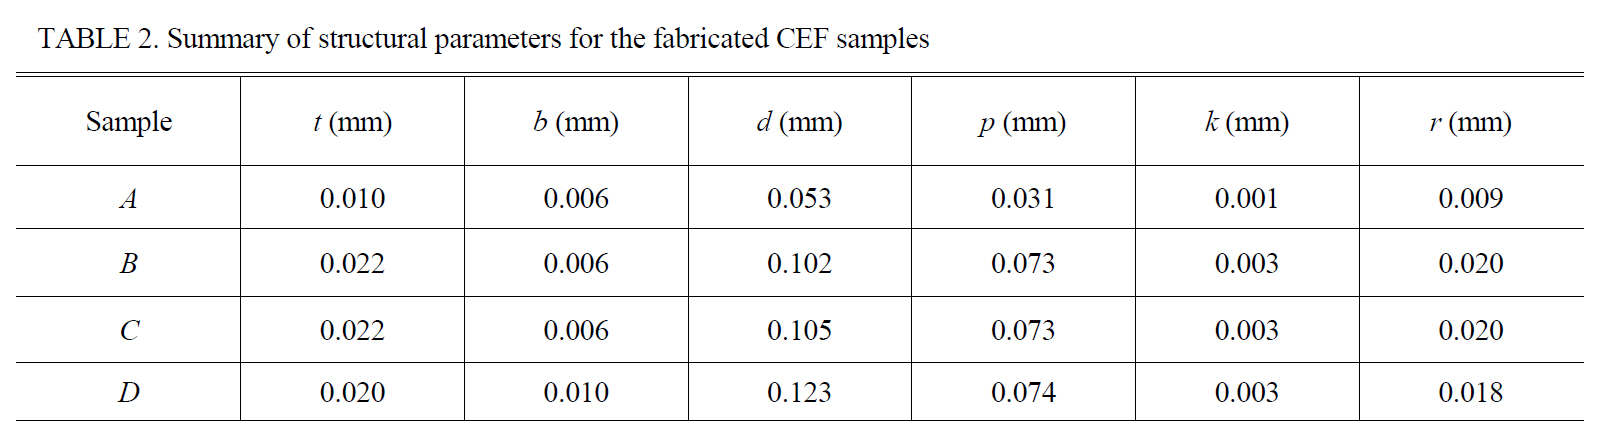 Summary of structural parameters for the fabricated CEF samples